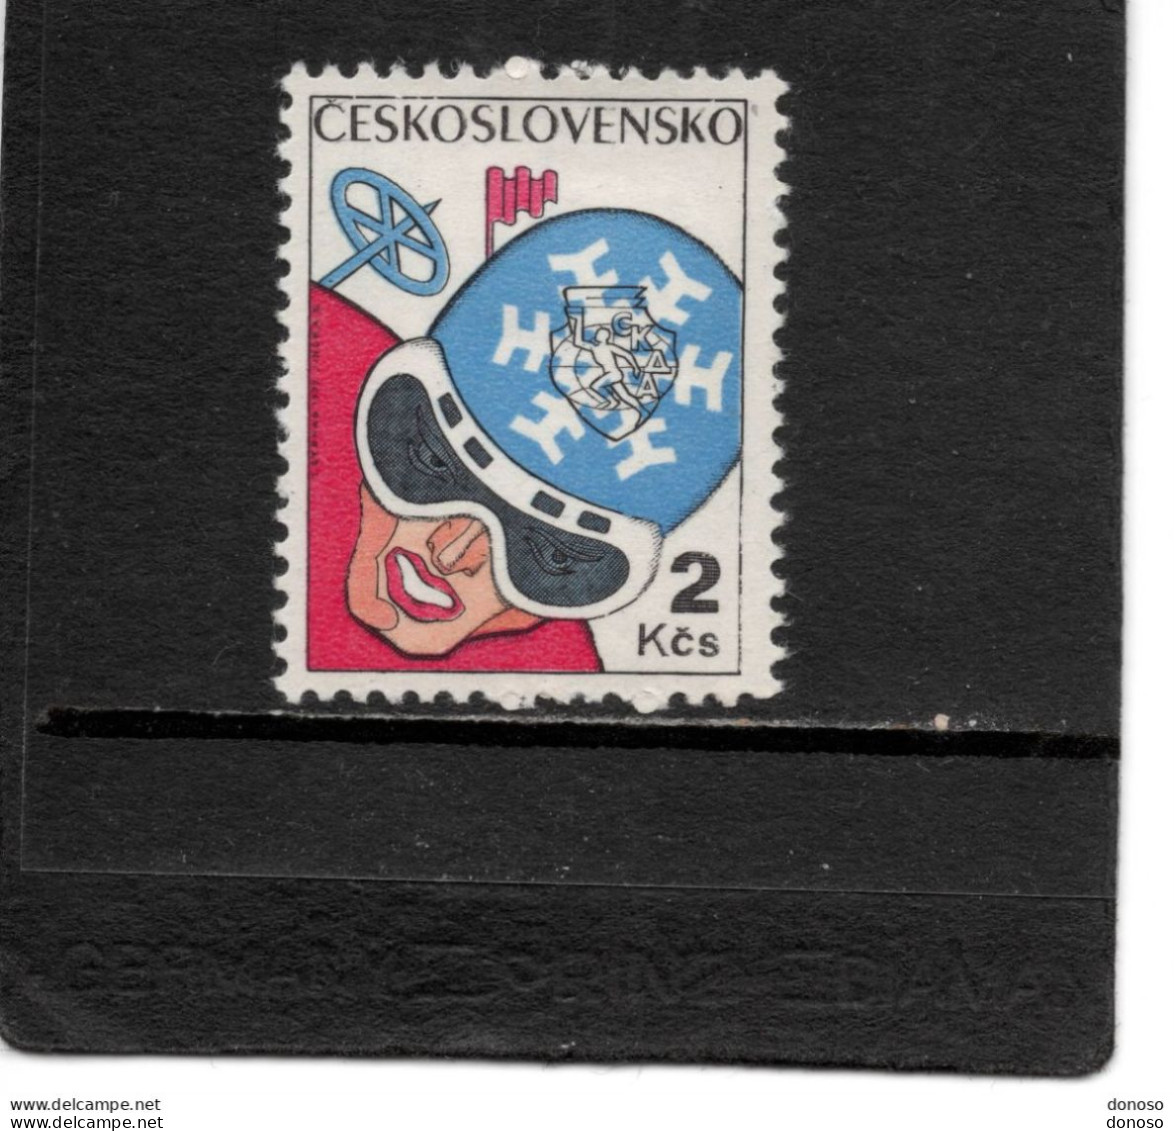 TCHECOSLOVAQUIE 1977 Course à Skis Yvert 2195, Michel 2359 NEUF** MNH - Unused Stamps